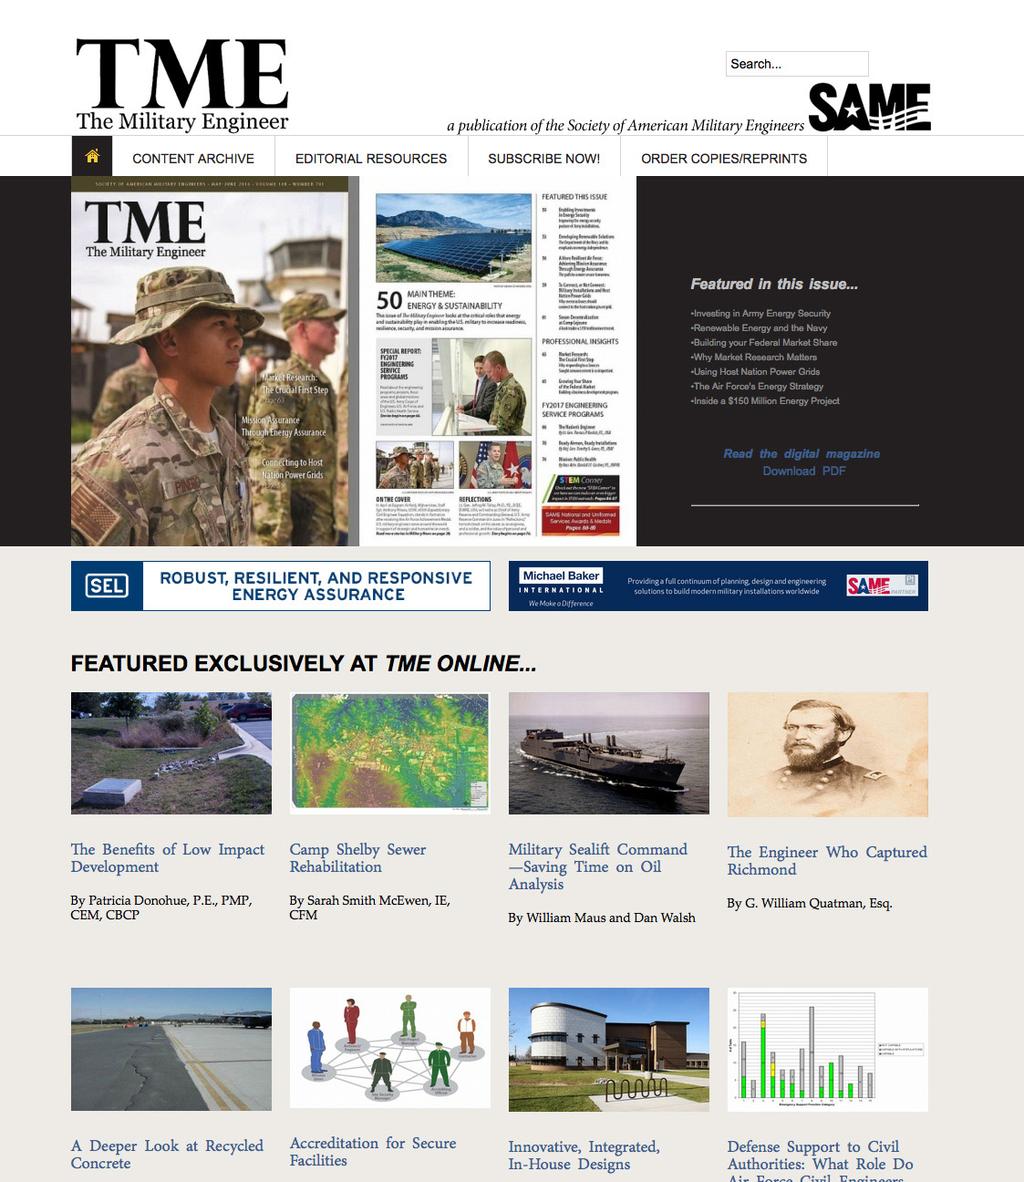 Online Advertising for TME Online provides an interactive PDF of the full print version with hyperlinks from advertisements to company websites.